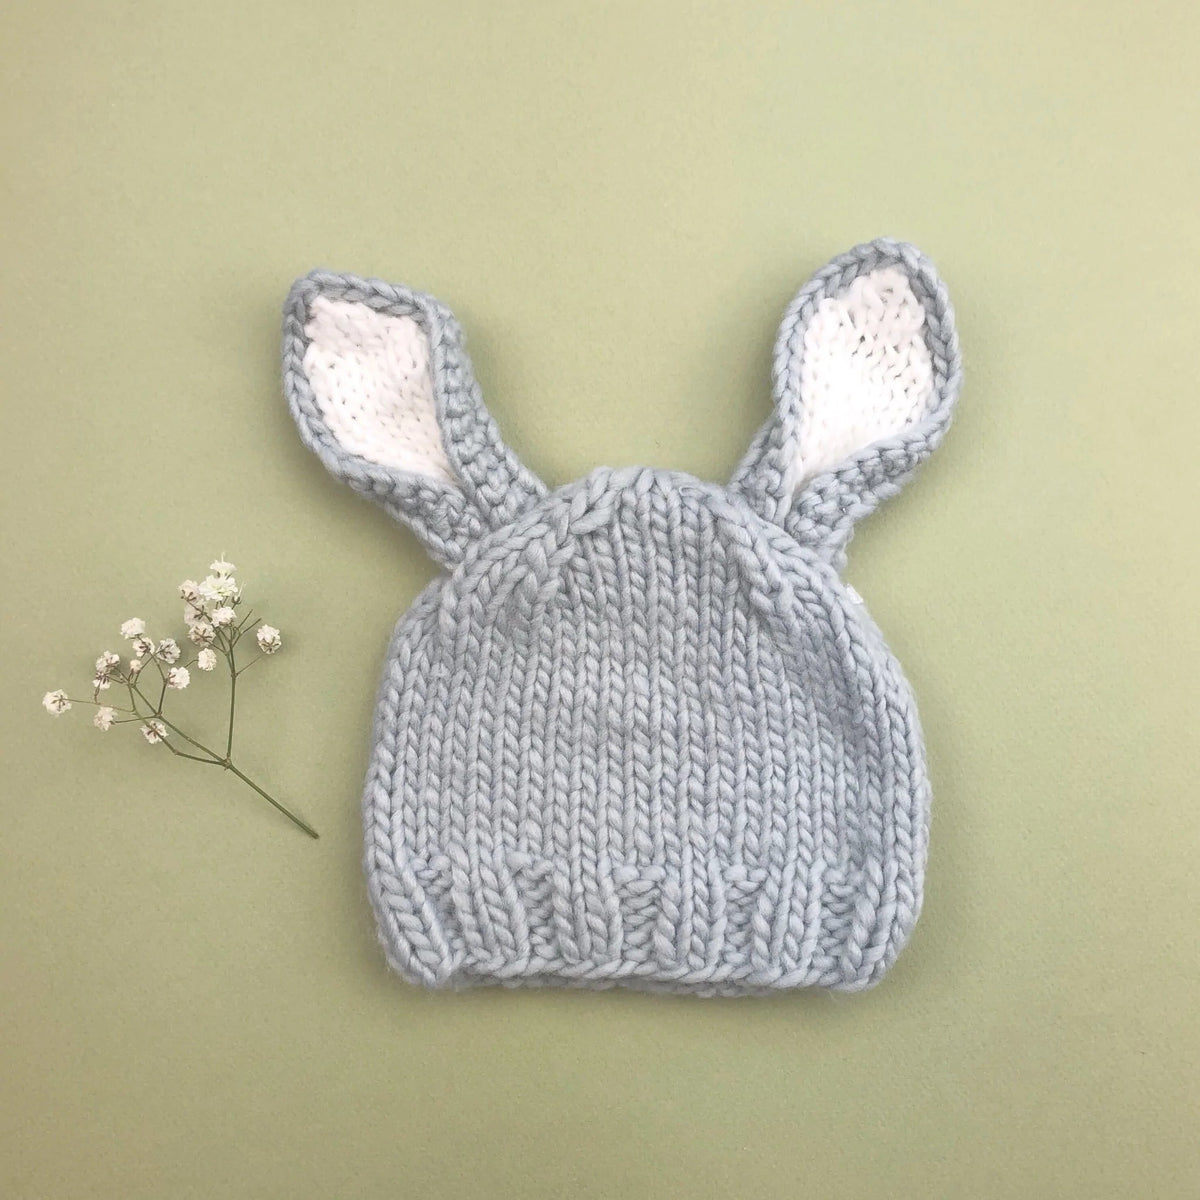 Bailey Bunny Hand Knit Hat | Grey With White Ears by Blueberry Hill